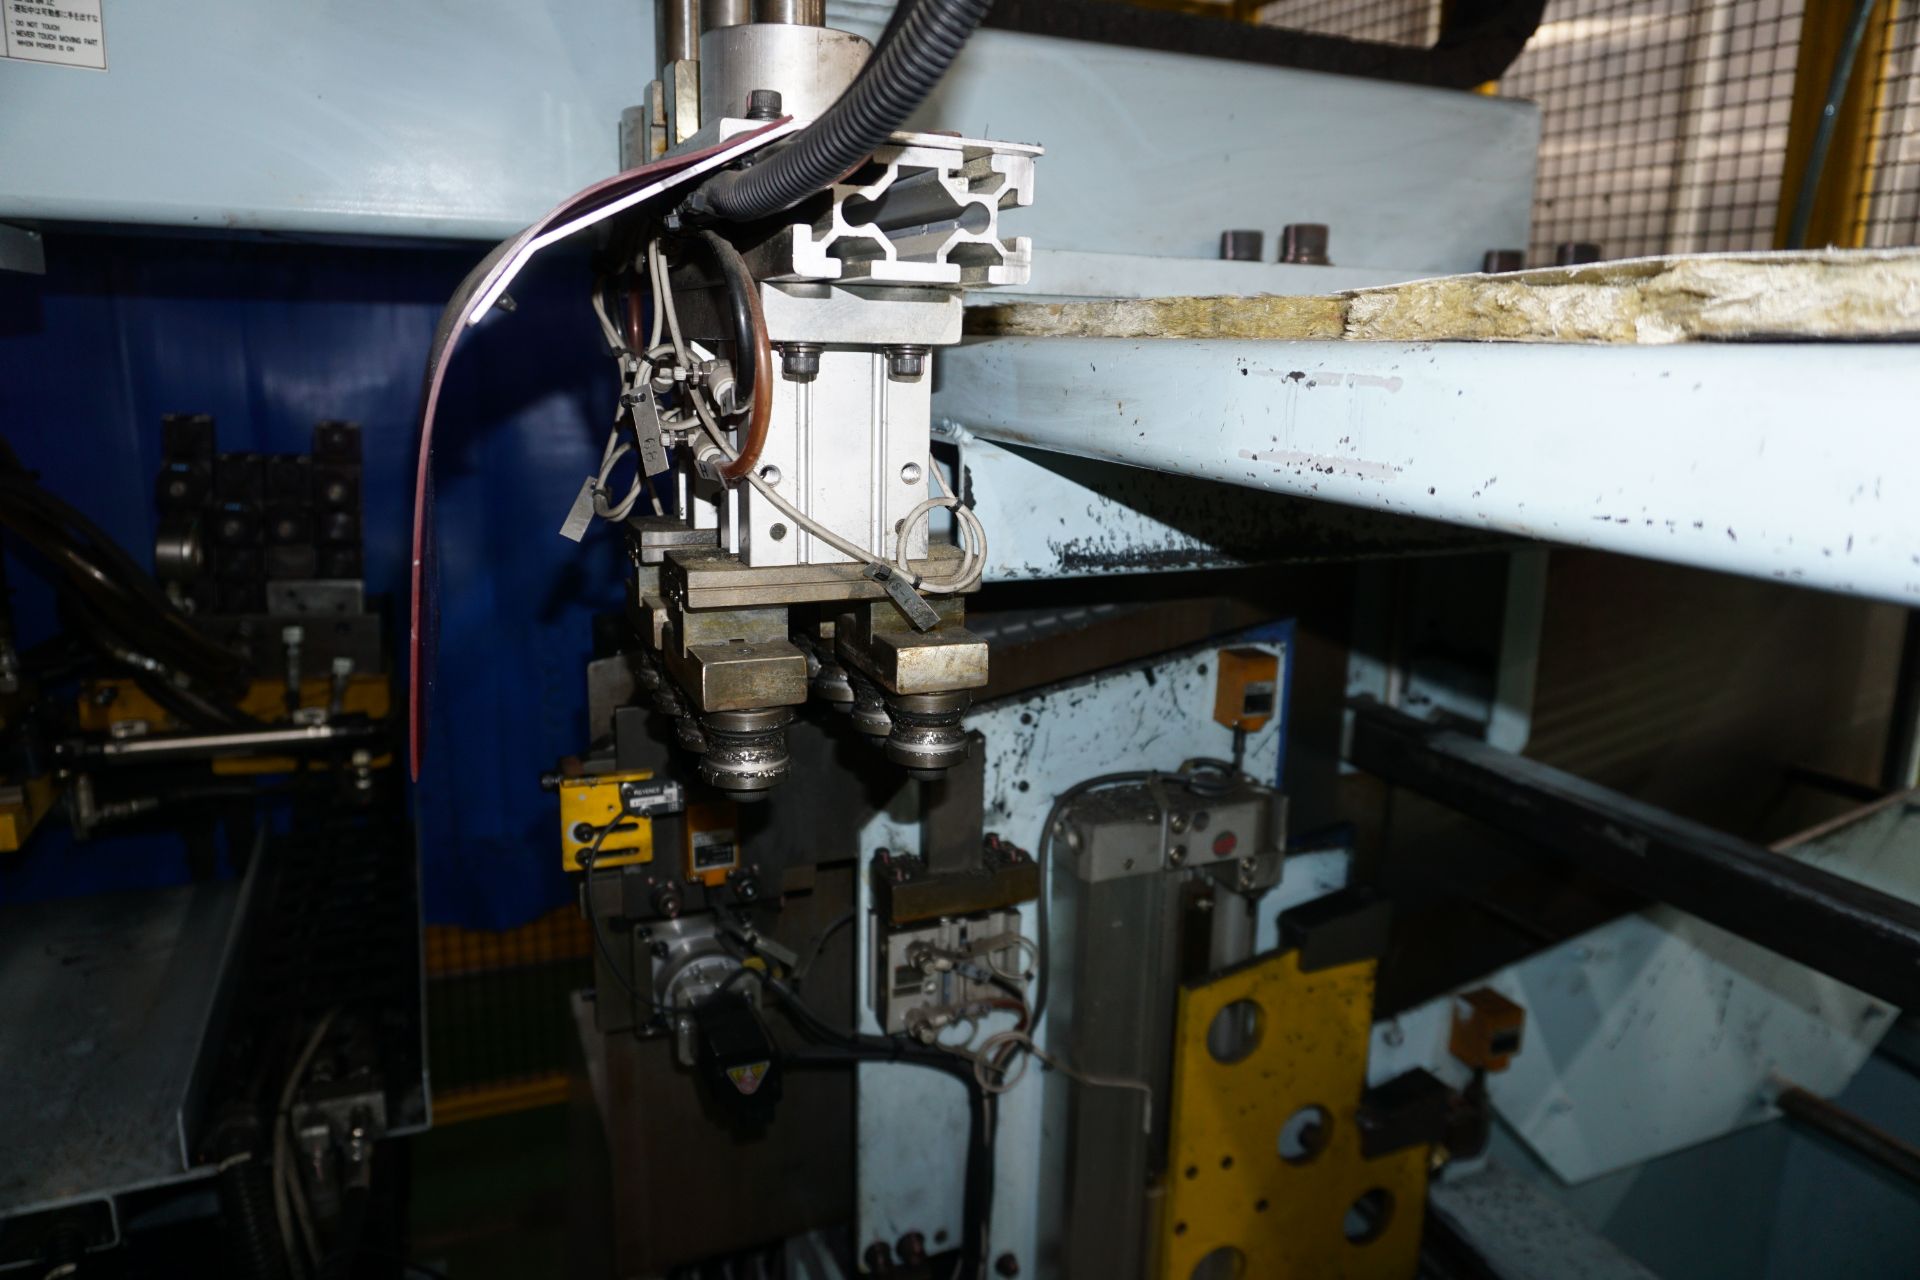 Keiyo automated tube bending/pressing system with a Yaskawa Motorman HP20D high precision robot - Image 26 of 46